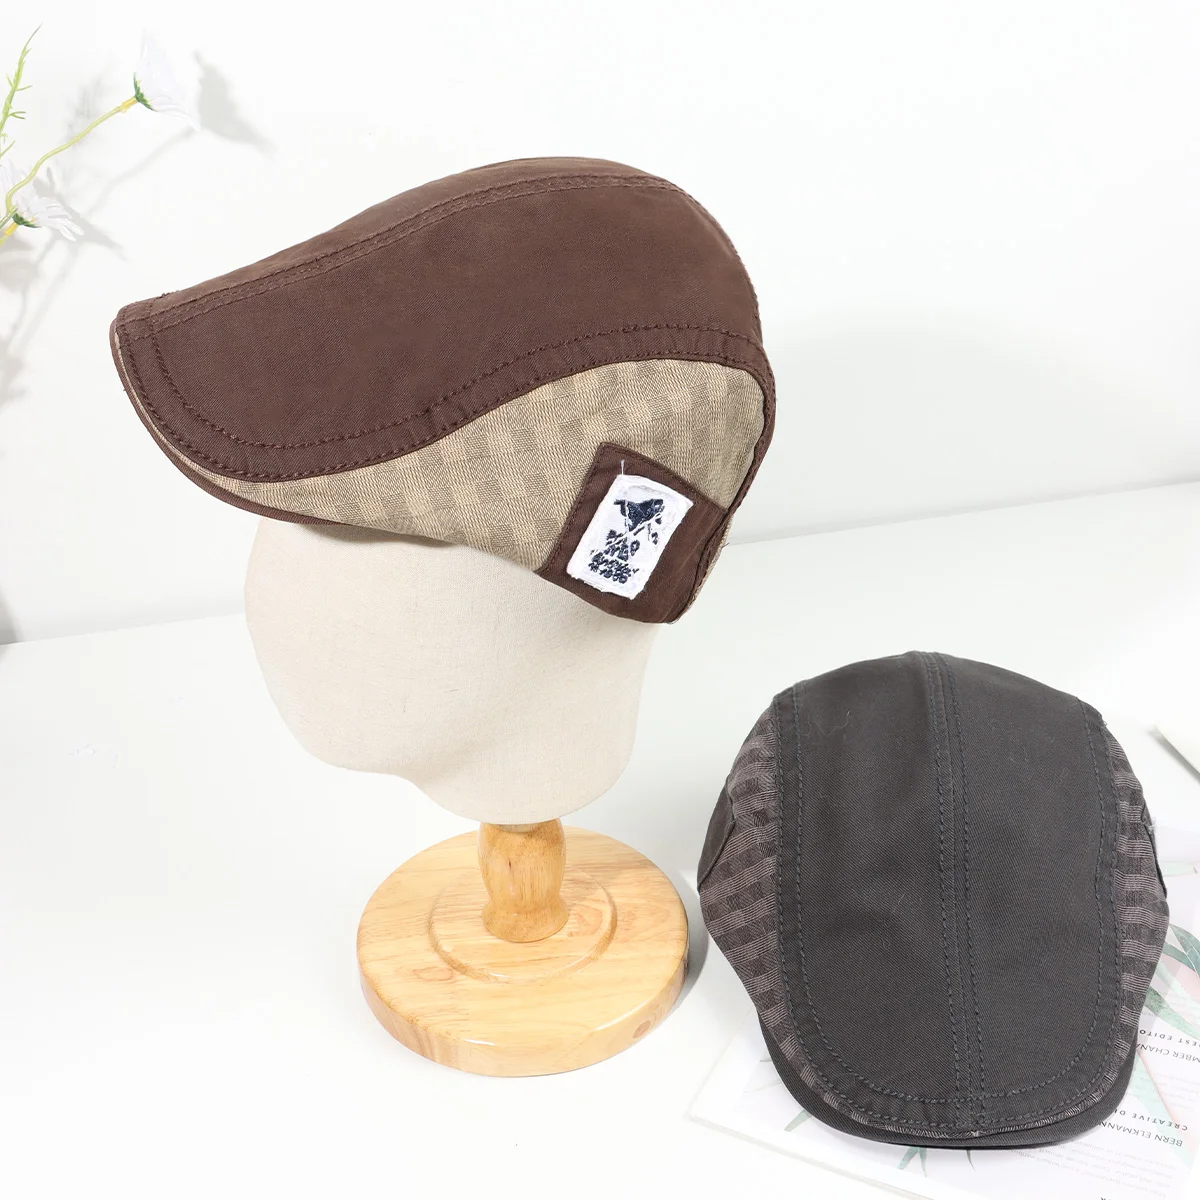 Embroidery Beret Spring/Summer Man Woman Simple Everything Casual Forward Hat Male British Painter Newsboy Beret Flat Ivy Cap